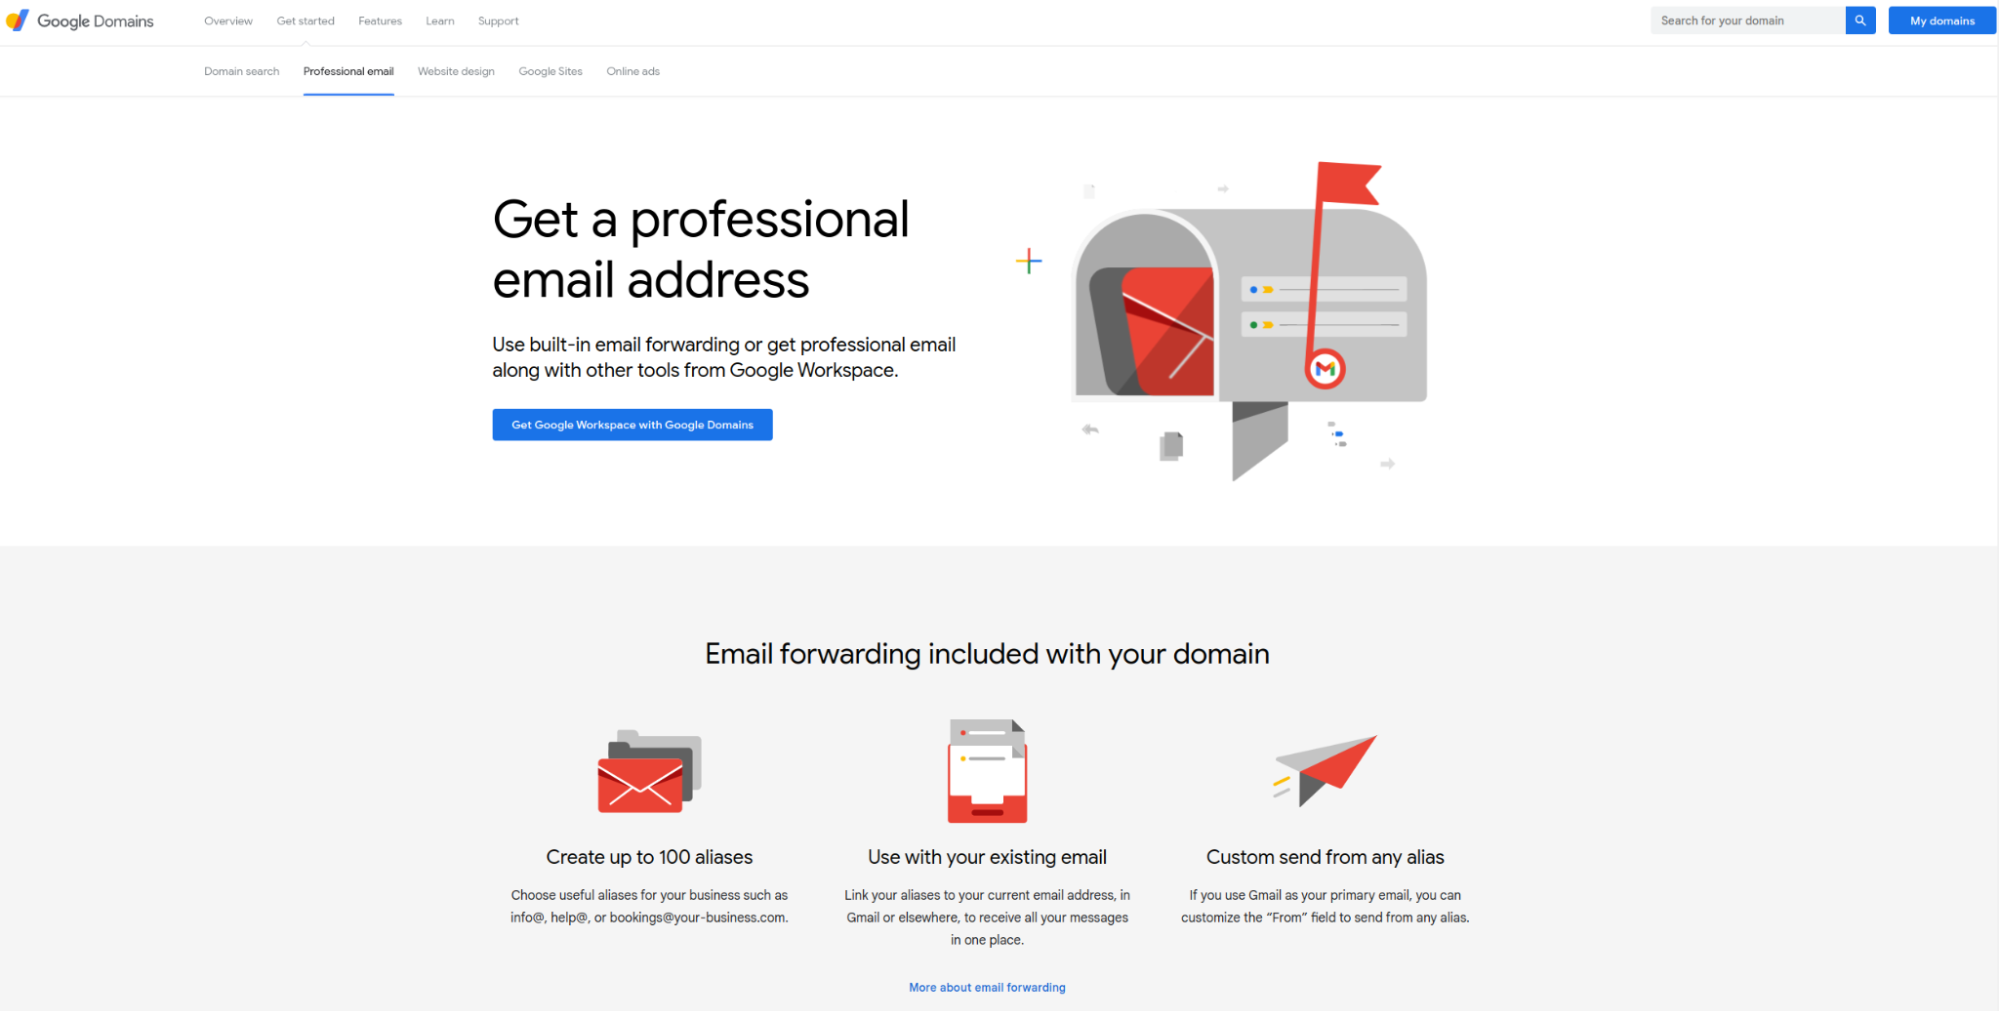 Creating a professional email address with Google Domains